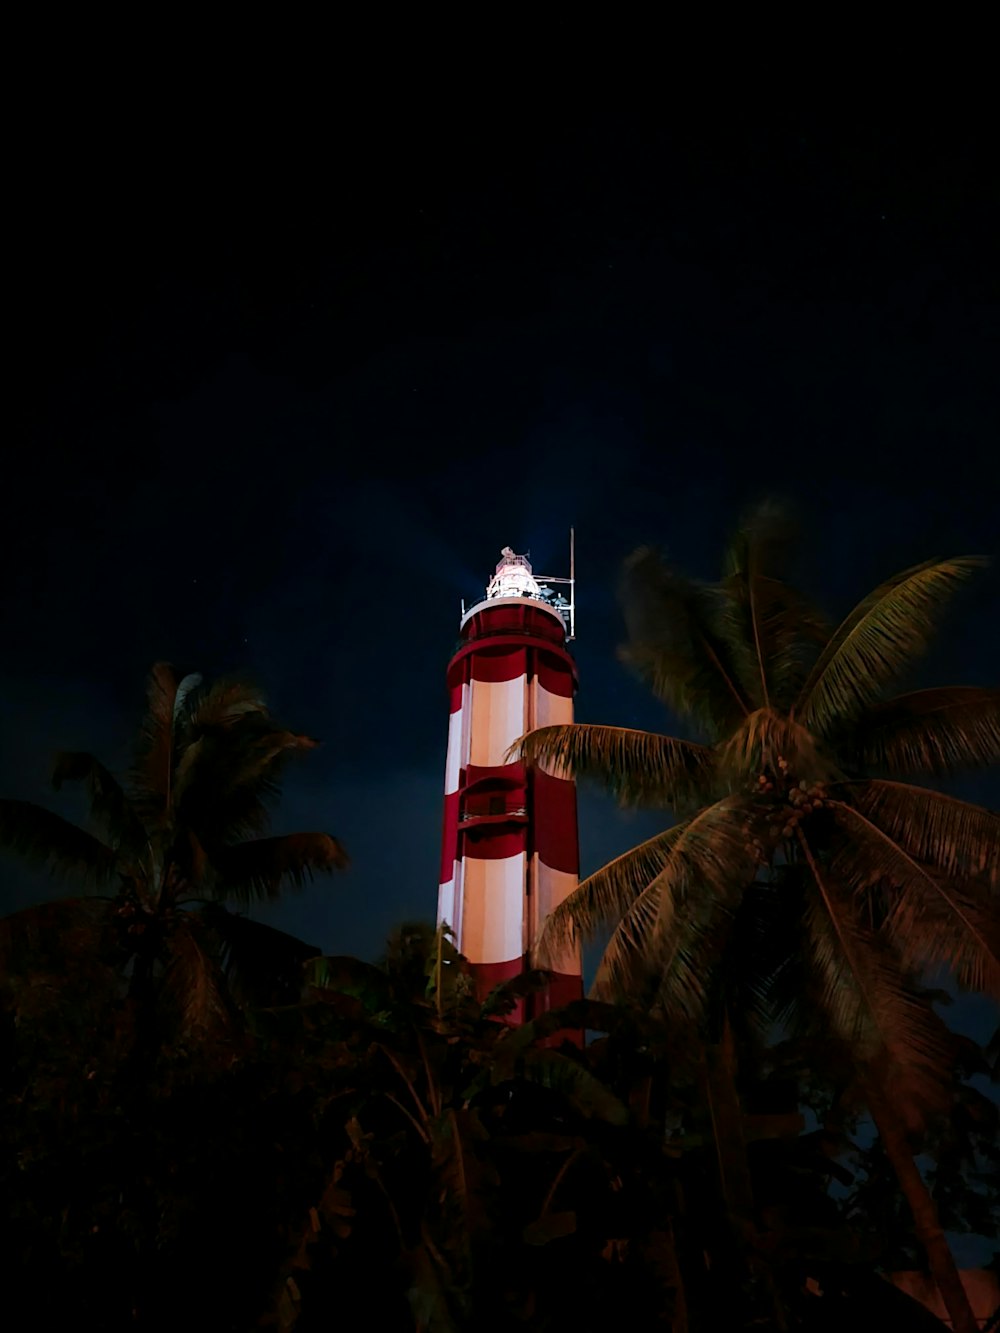 a tall red and white tower sitting next to palm trees